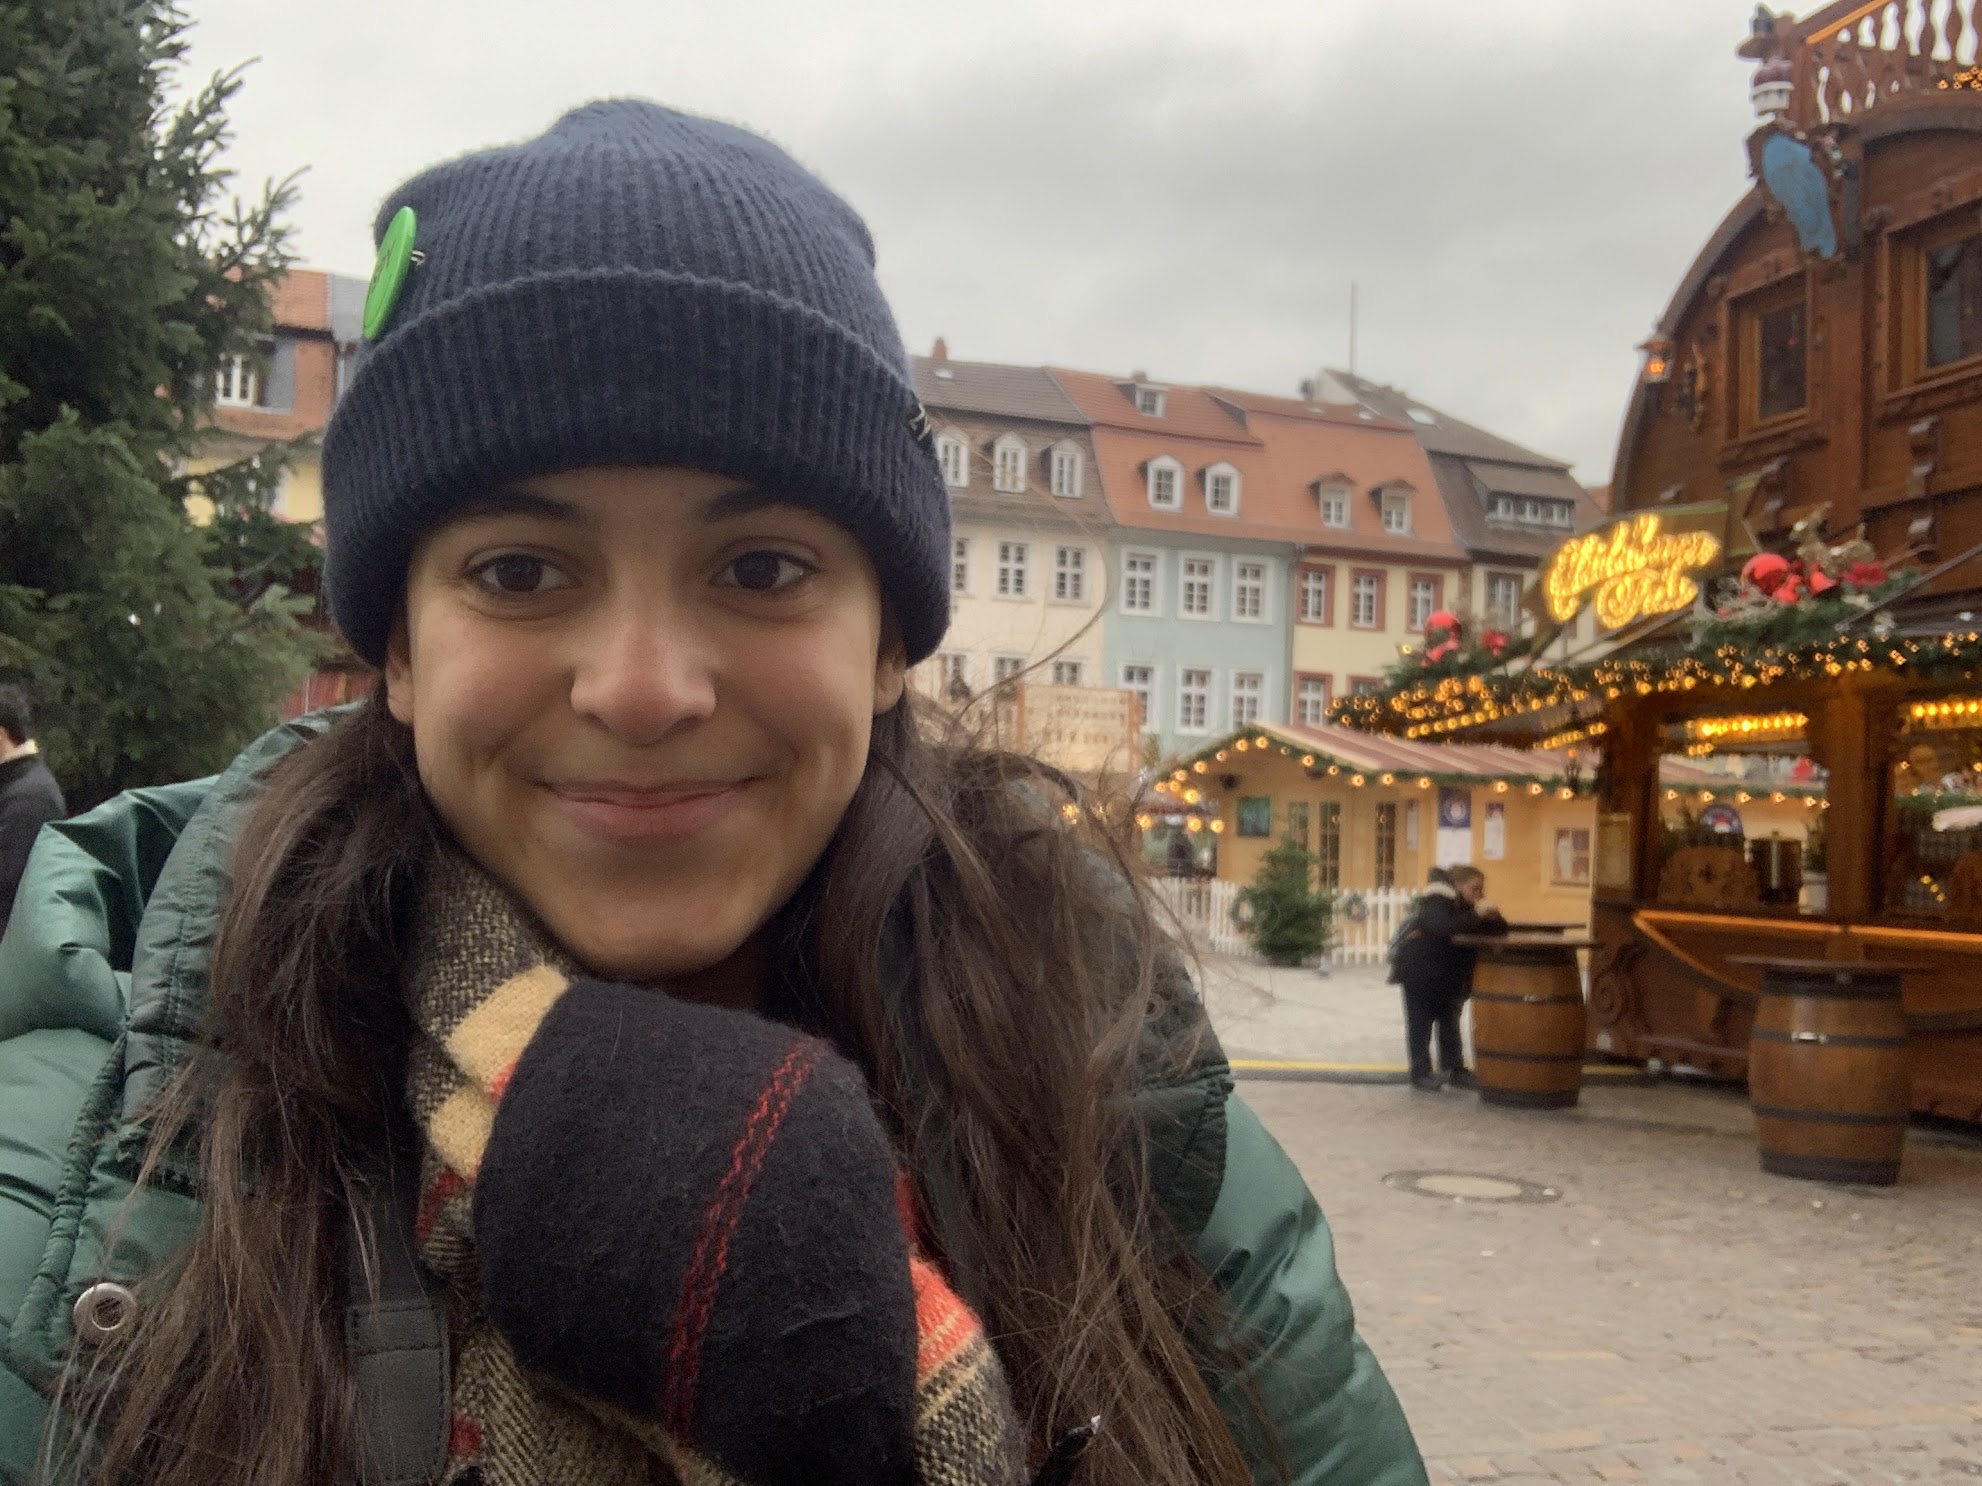 In the Heidelberg Christmas Market - little colorful houses and wooden stands in the background.